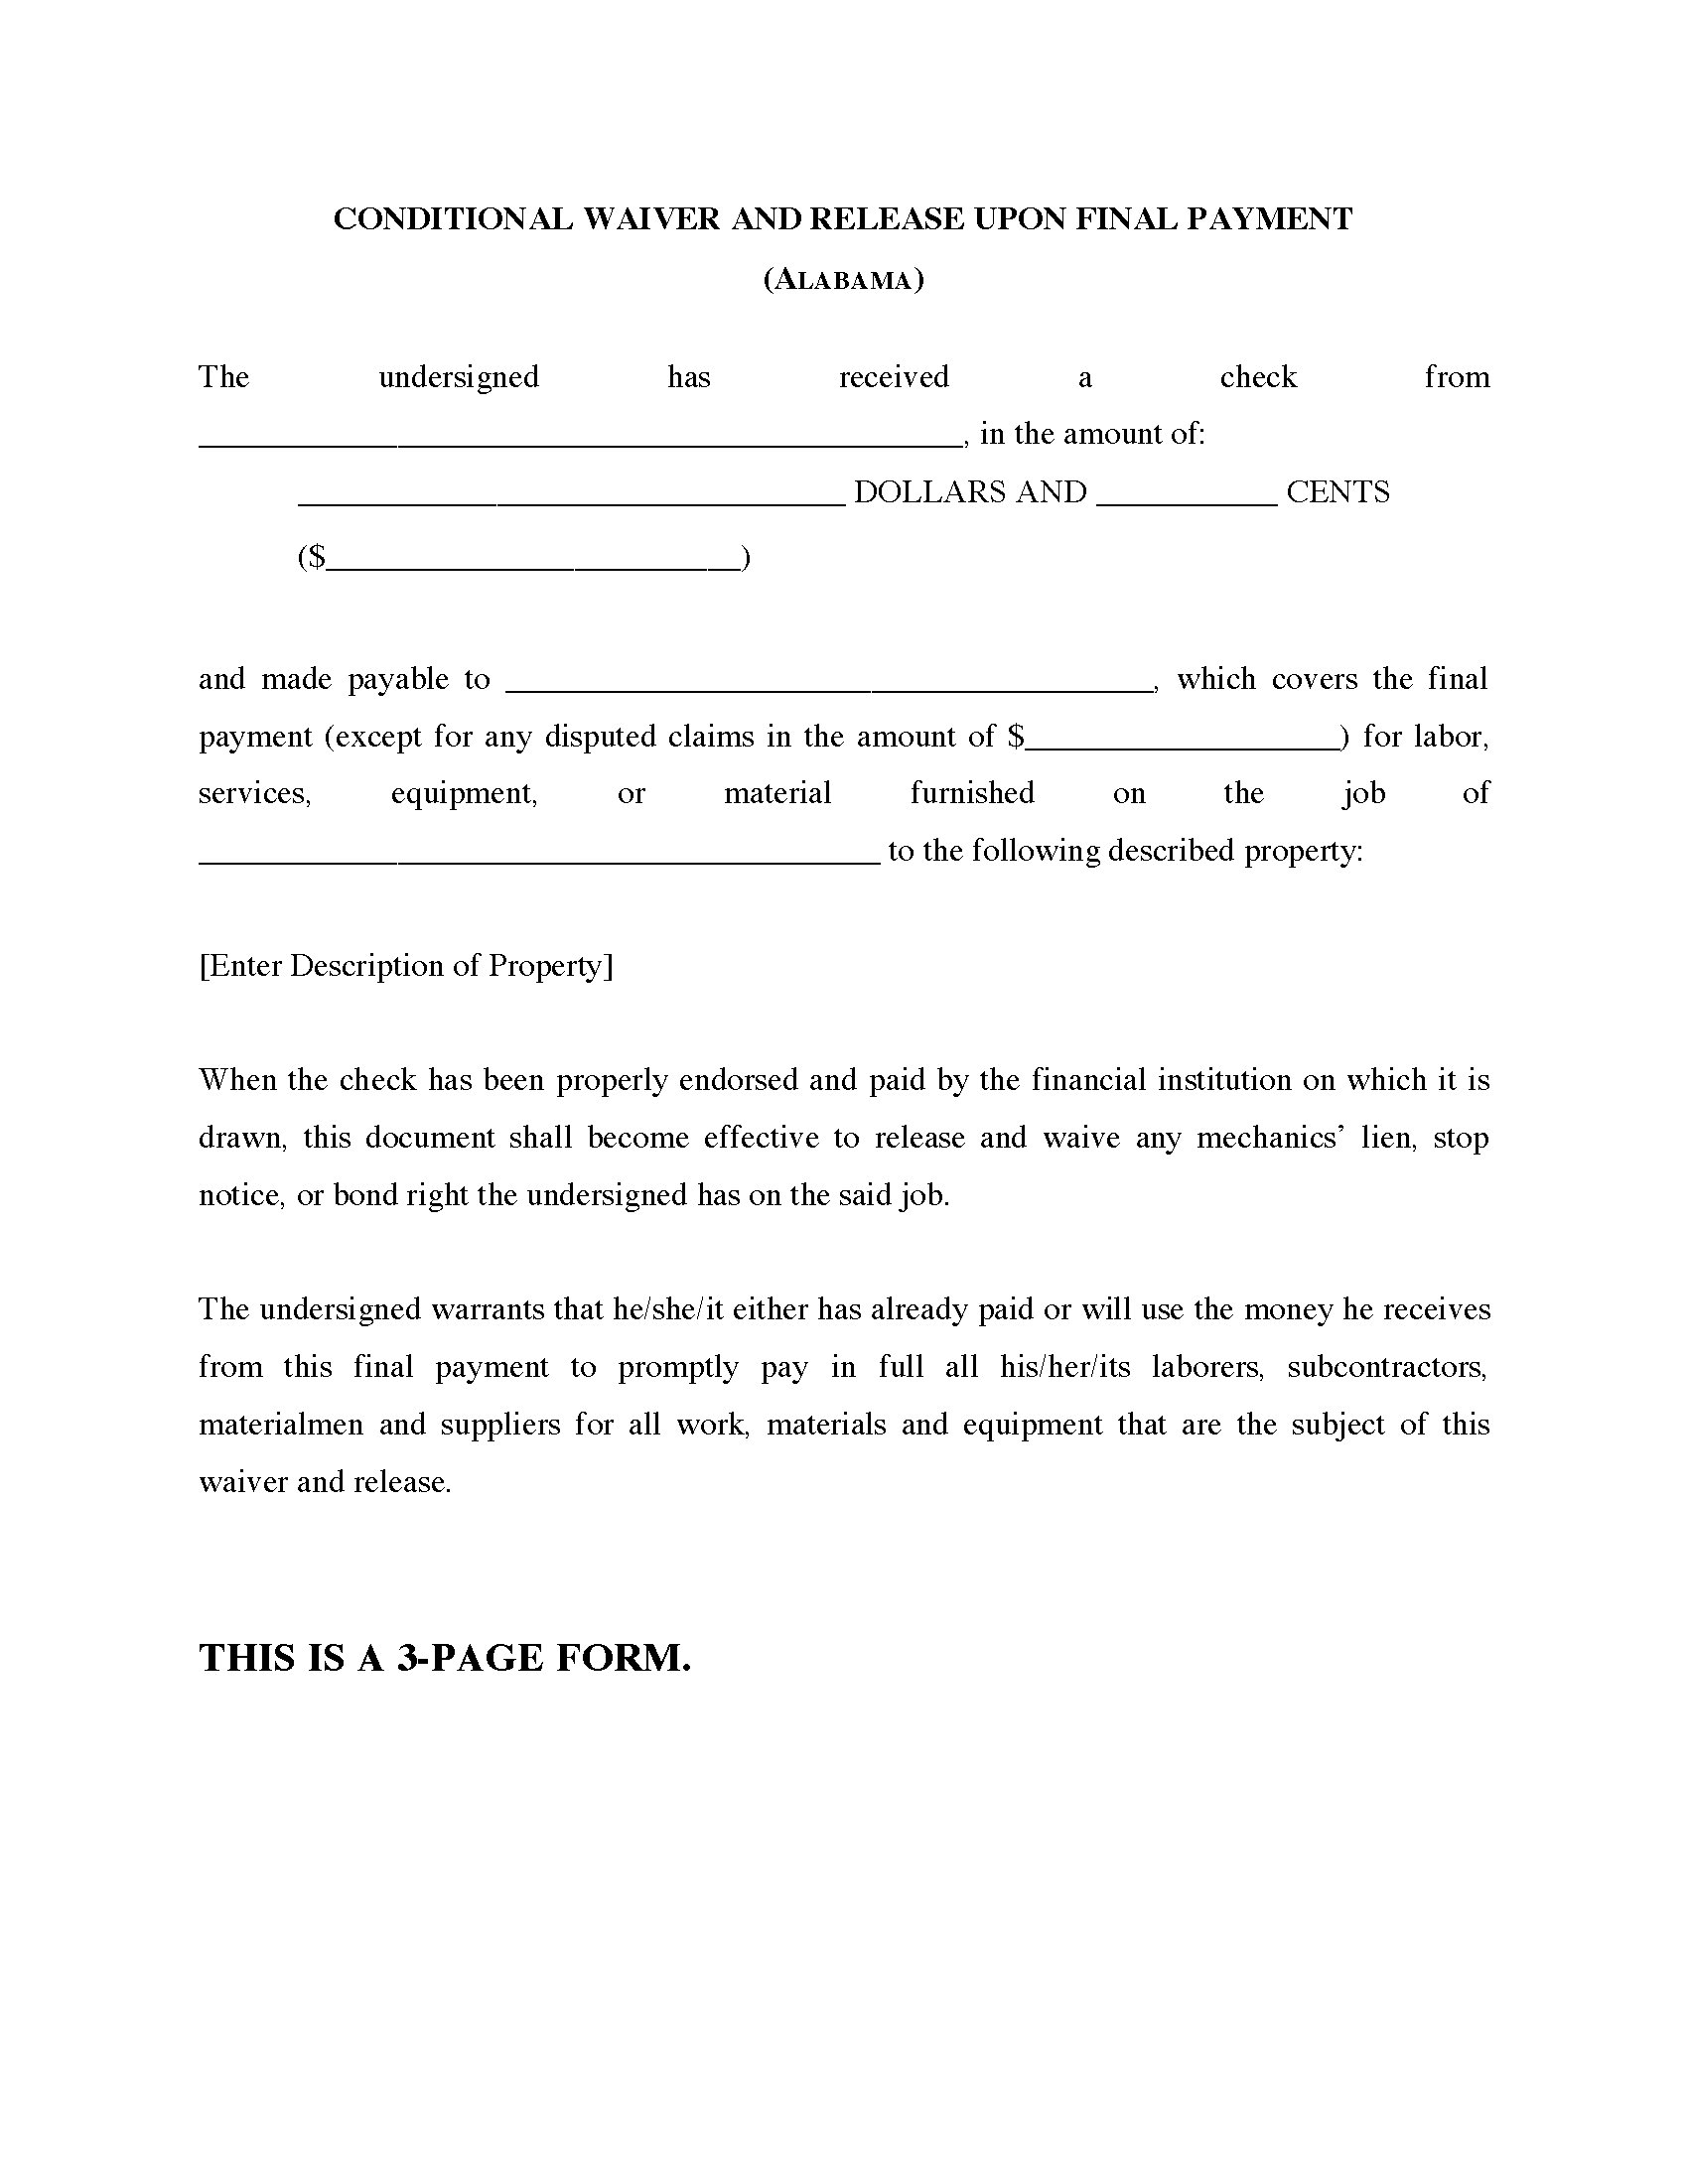 Alabama Conditional Waiver and Release of Lien Upon Final Payment ...